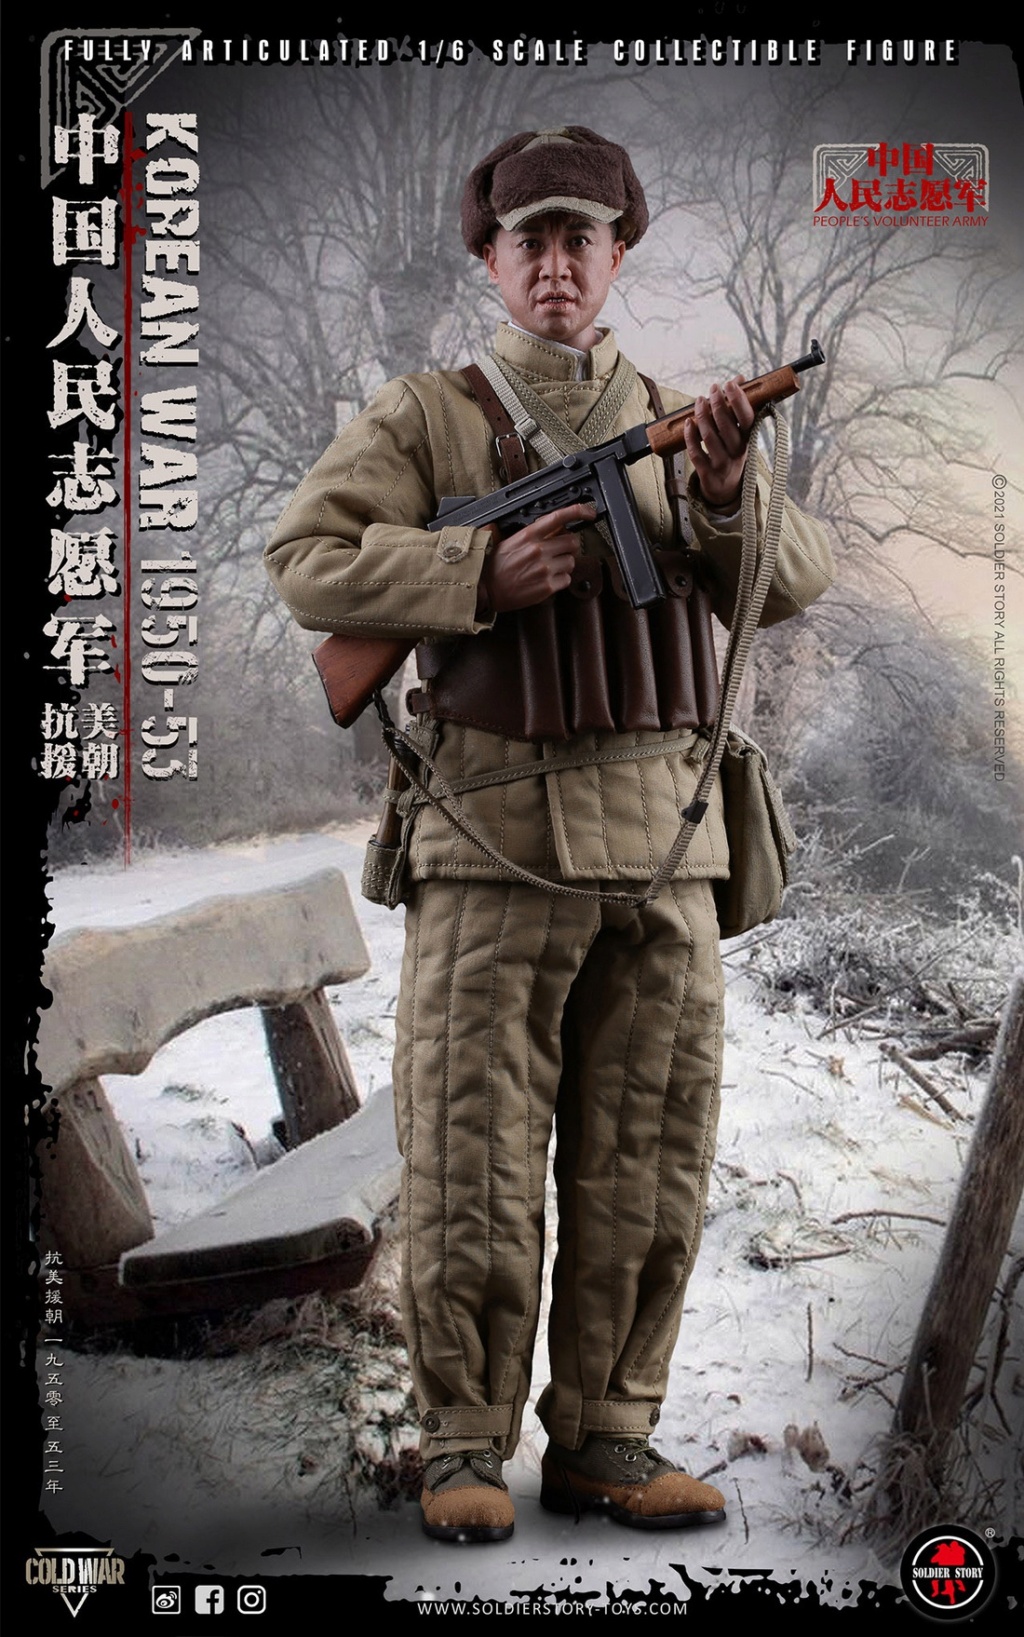 chinese - NEW PRODUCT: SOLDIER STORY: 1/6 Chinese People’s Volunteers 1950-53 Collectible Action Figure (#SS-124) Ddbcb110